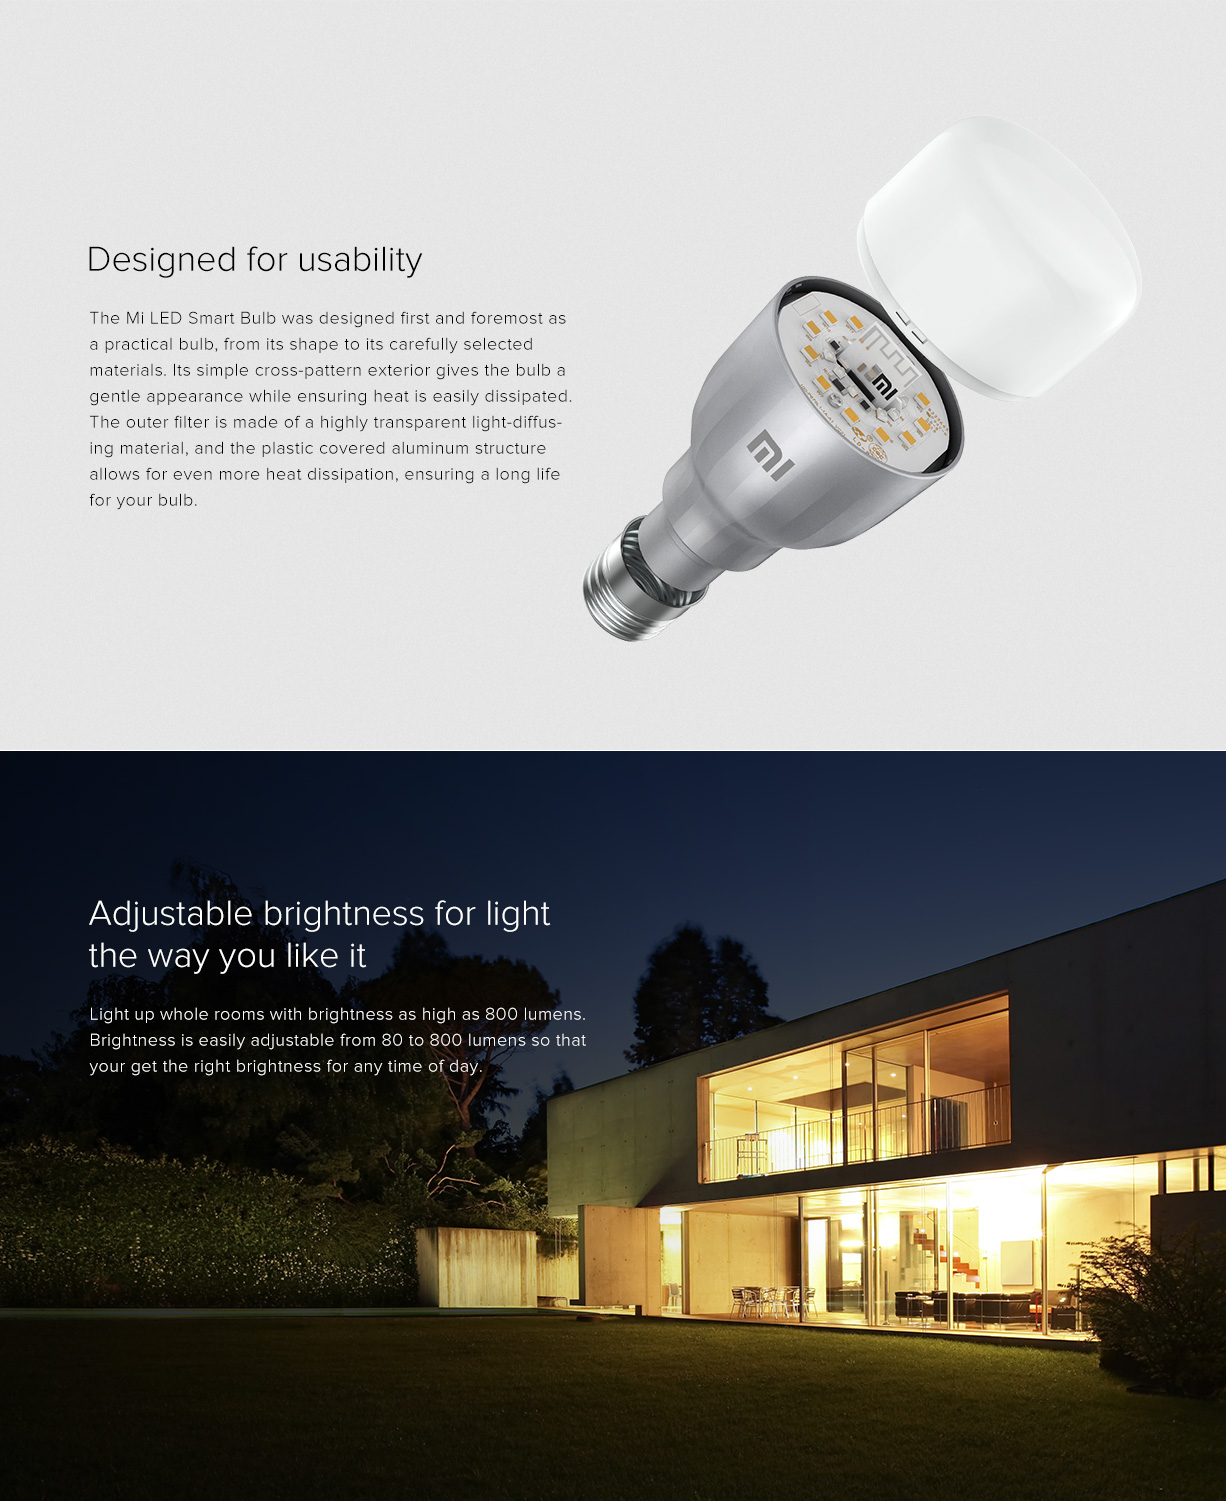 707C45C9 902E 13E4 A626 0C6E77A27163 Xiaomi Xiaomi Mi Smart Led Bulb Essential(White And Color) Wifi Remote Control Smart Light Work With Alexa And Google Assistant, Voice Control, Wifi Connection, Adjustable Color Temperature, Scheduled On/Off, Smart App Control Smart Bulb Xiaomi Mi Led Smart Bulb Essential Bulb (White And Color)(9W)